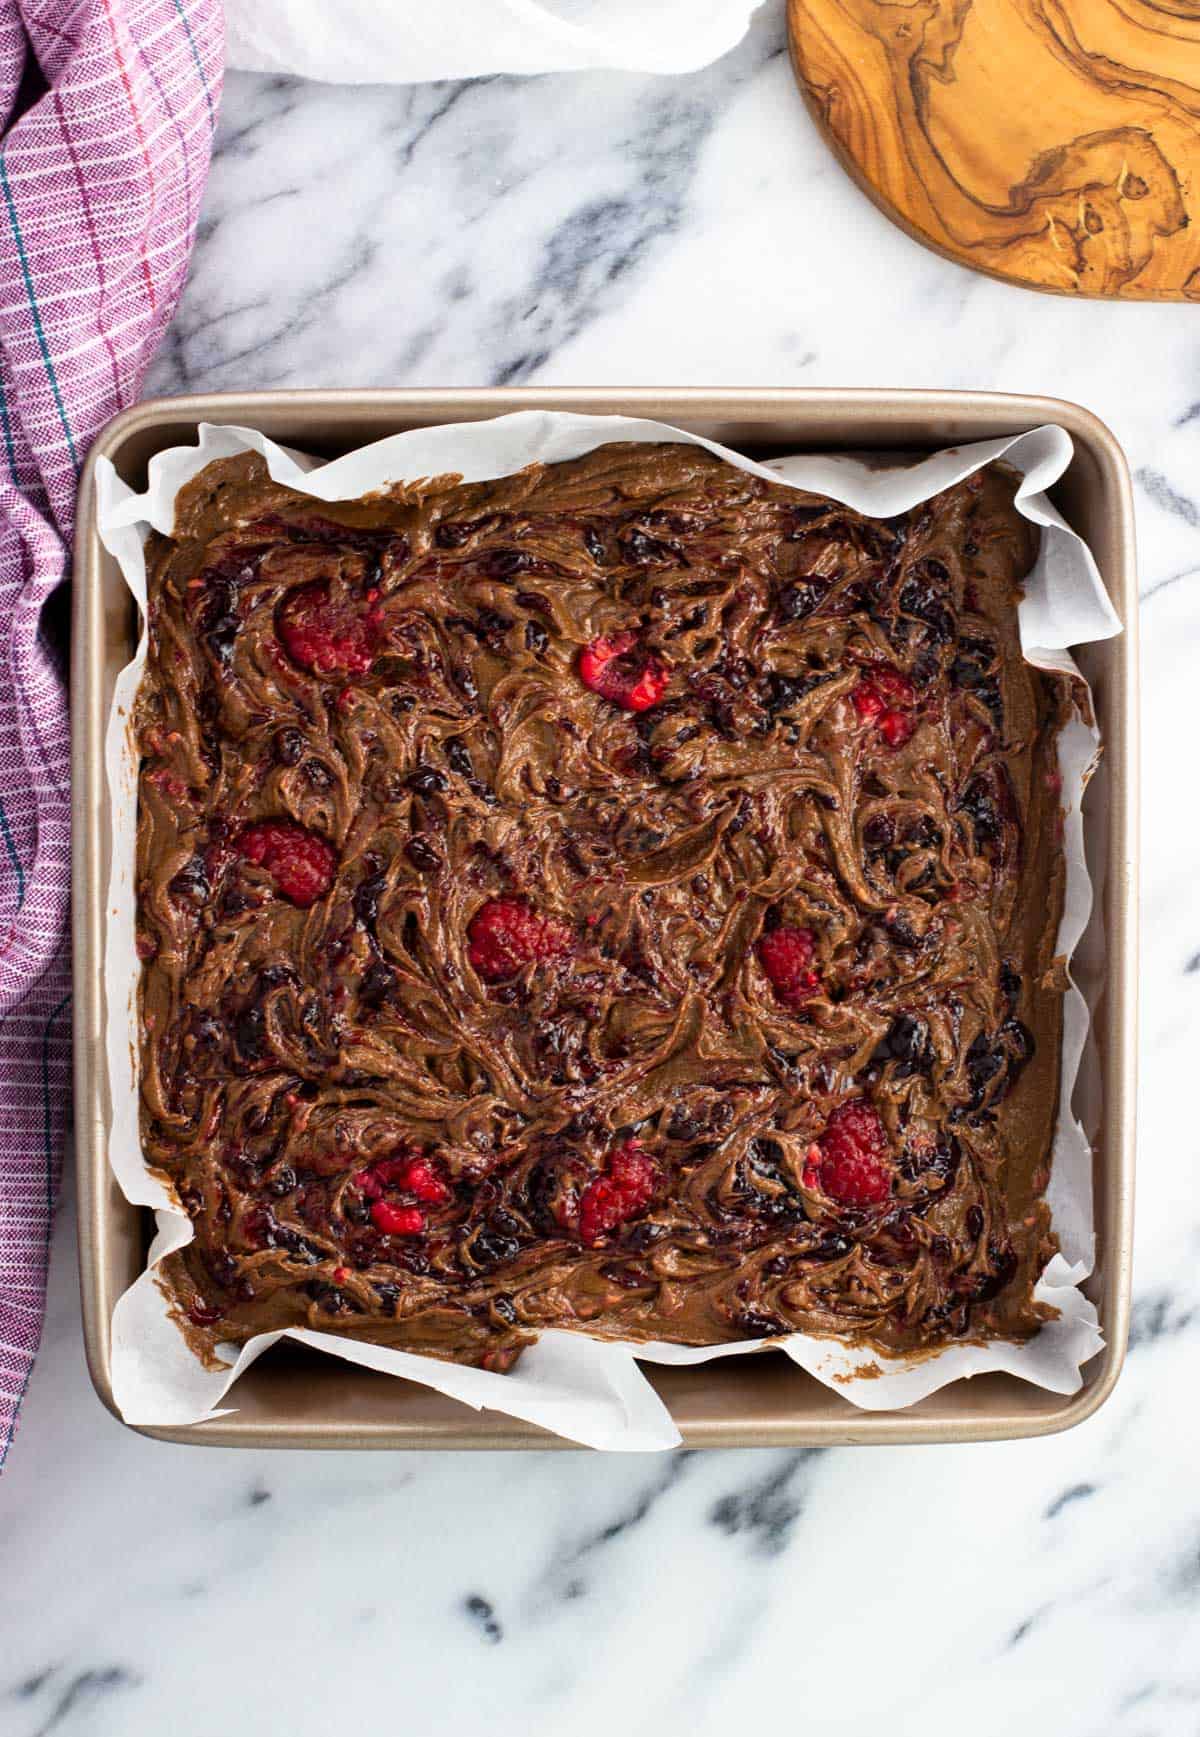 Raspberry jam swirled into a pan of brownies before baking.